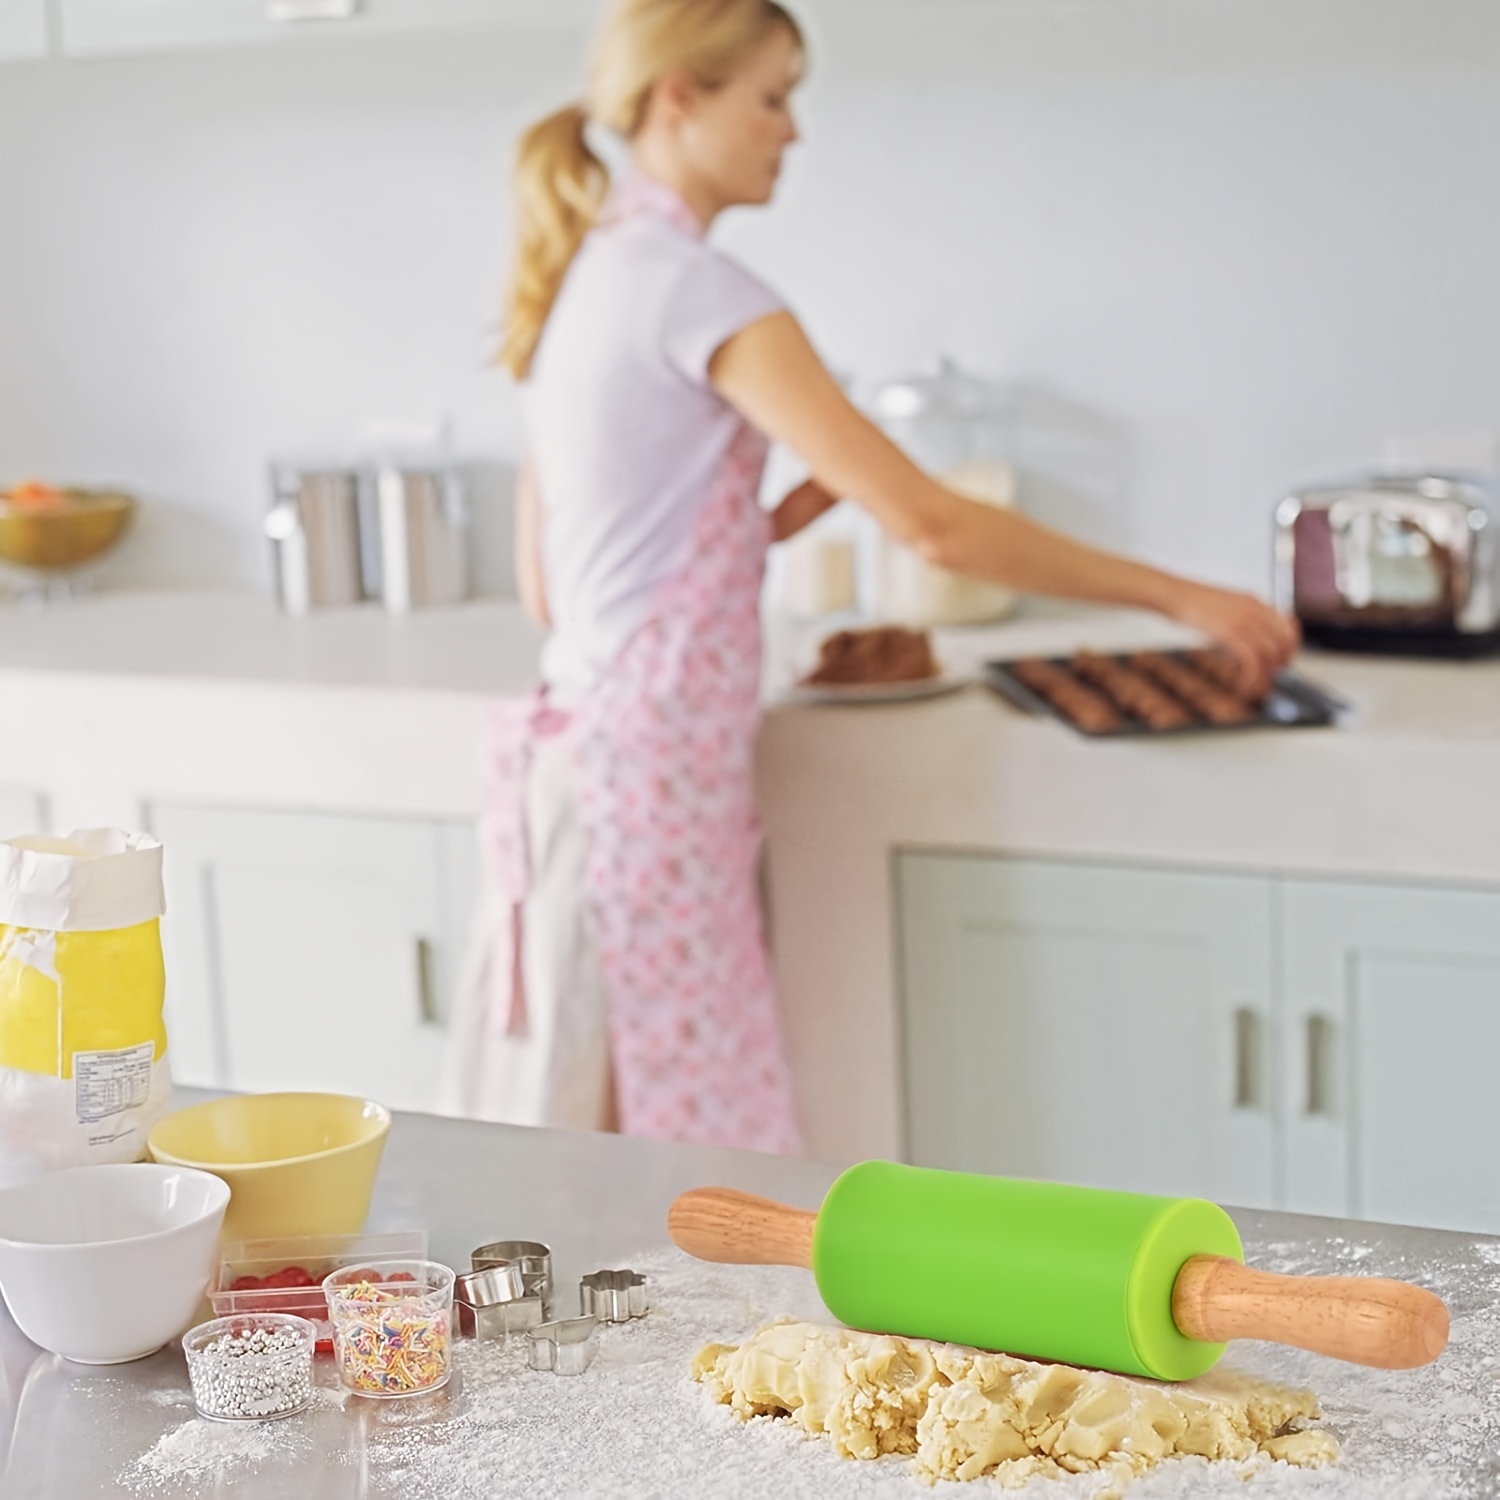 

1pc, Mini Rolling Pin, Dough Roller For Beginners, For Pizza, Pie, Cookie, Dumplings, Noodles, And More, Kitchen Utensils, Kitchen Gadgets, Kitchen Accessories